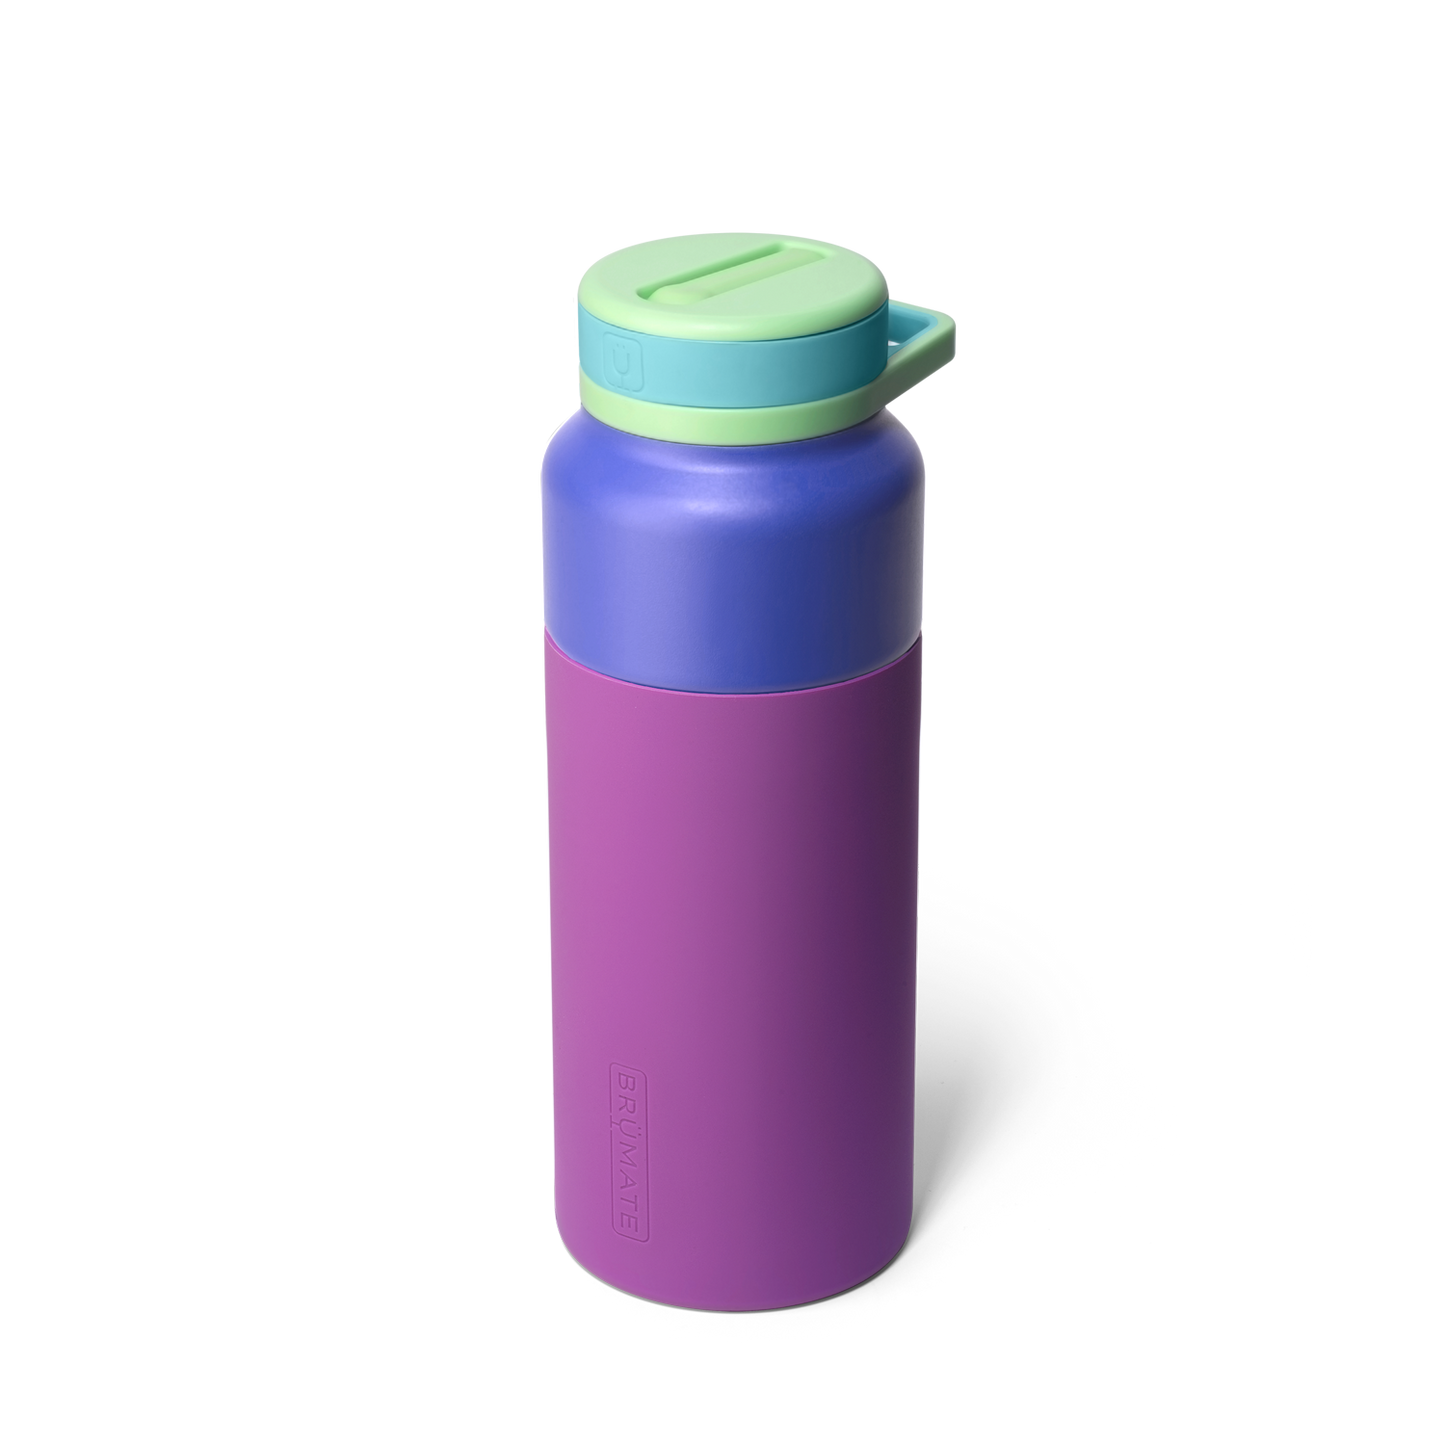 northern lights rotera water bottle that has a green lid, blue body, and purple base.